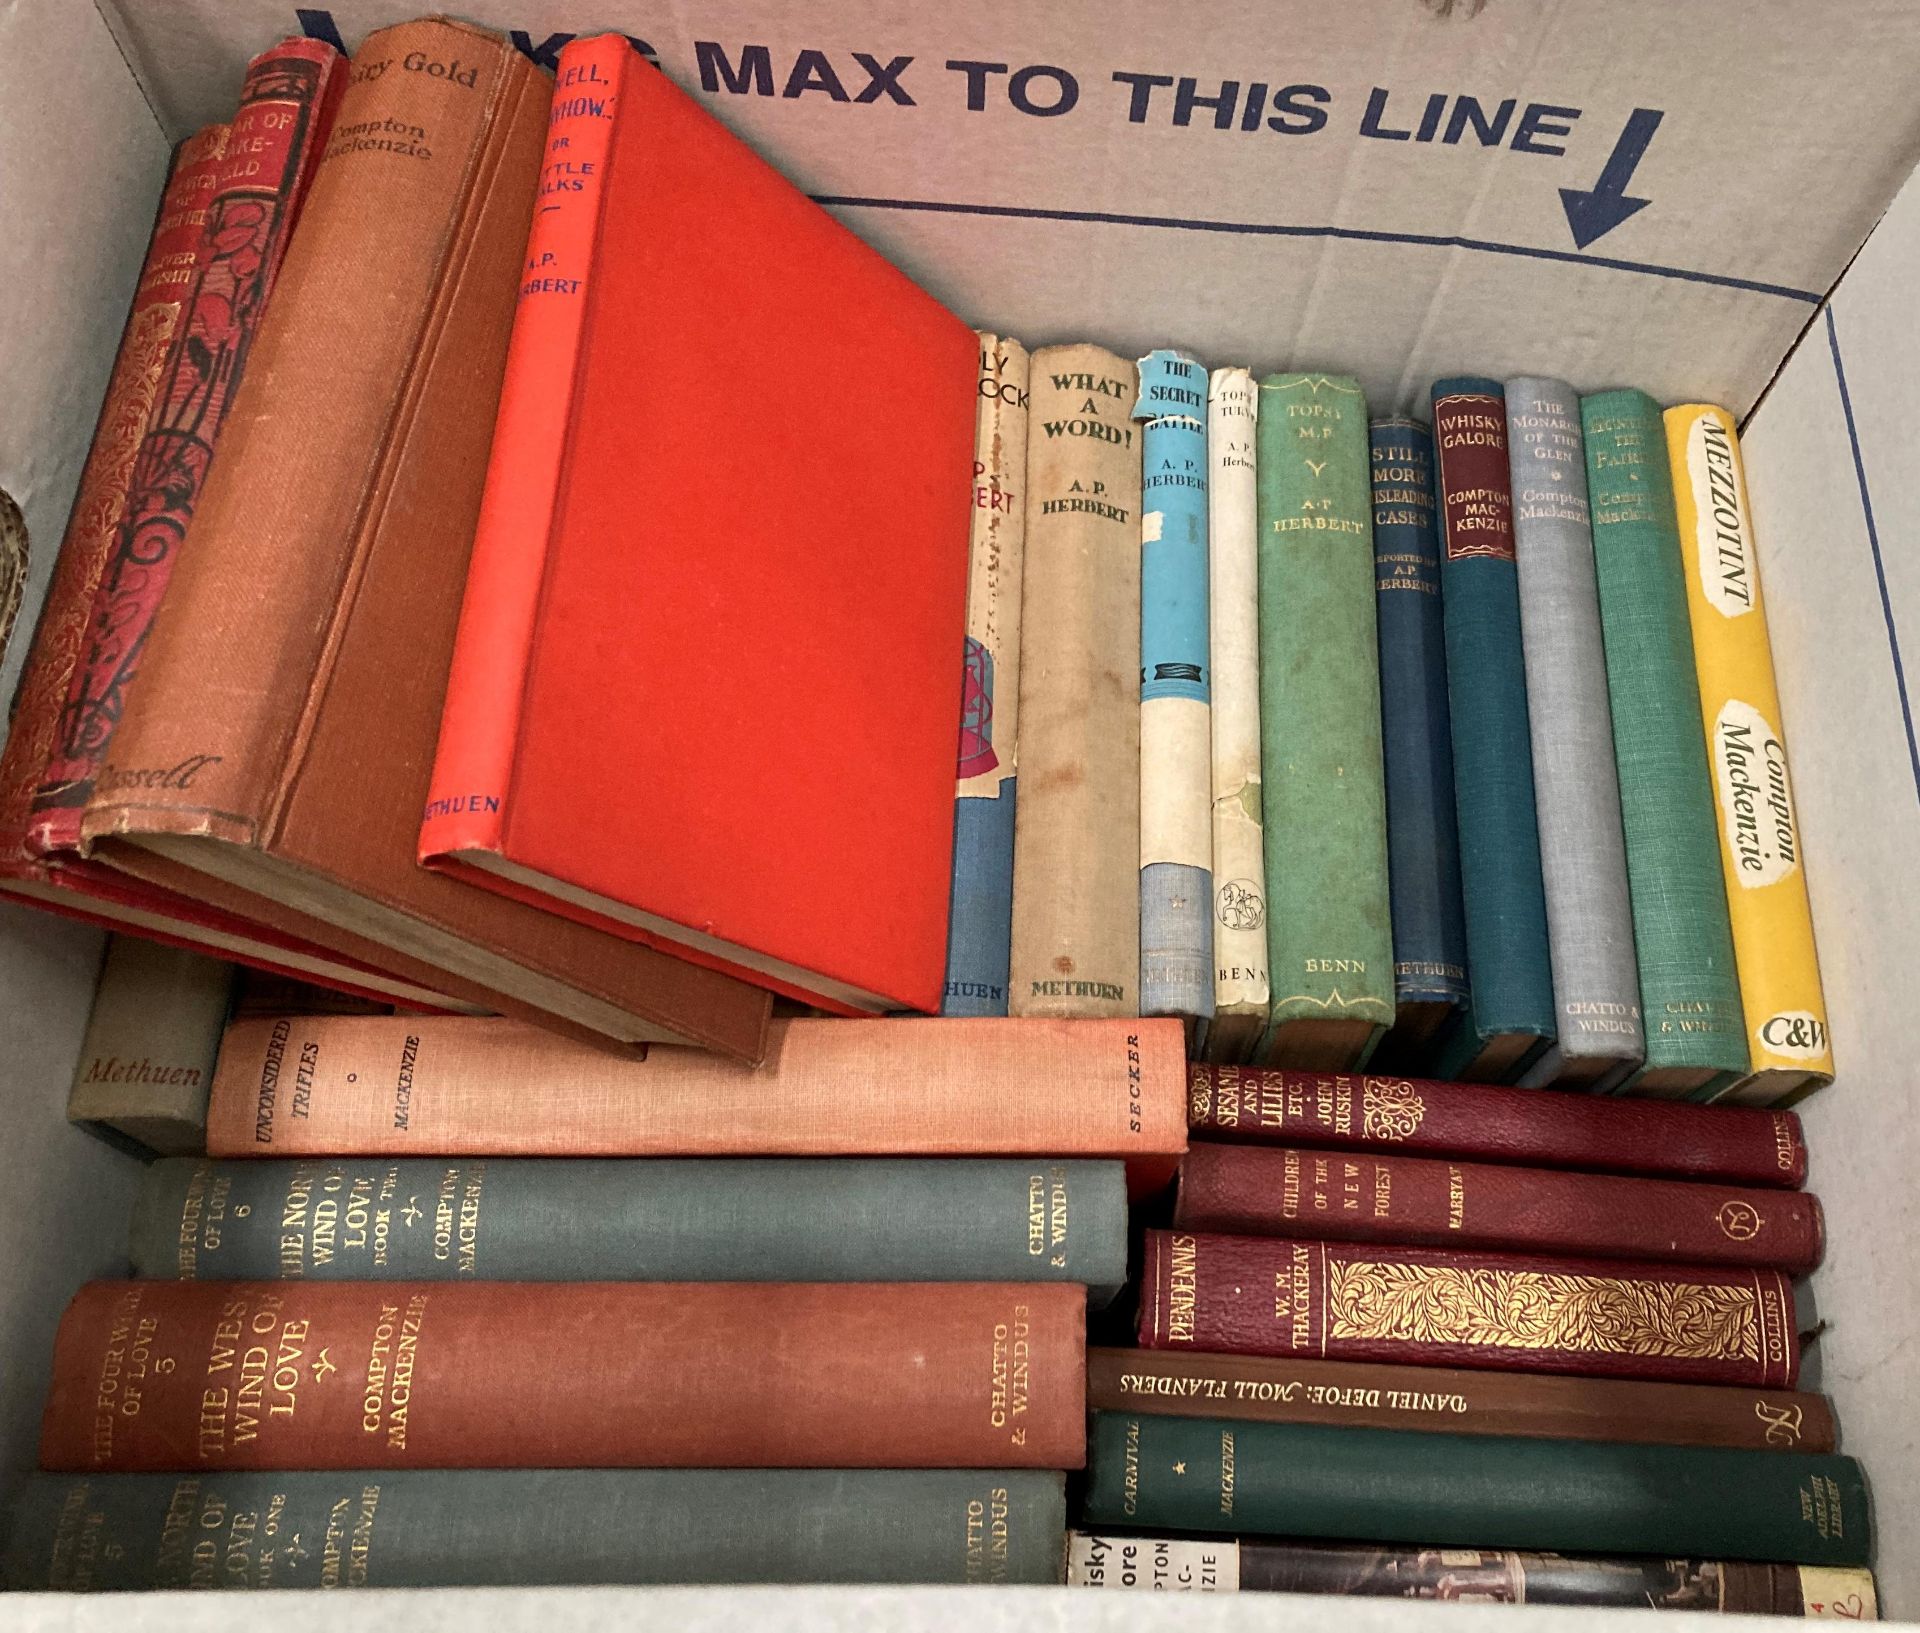 Contents to box - thirty one novels - thirteen by A.